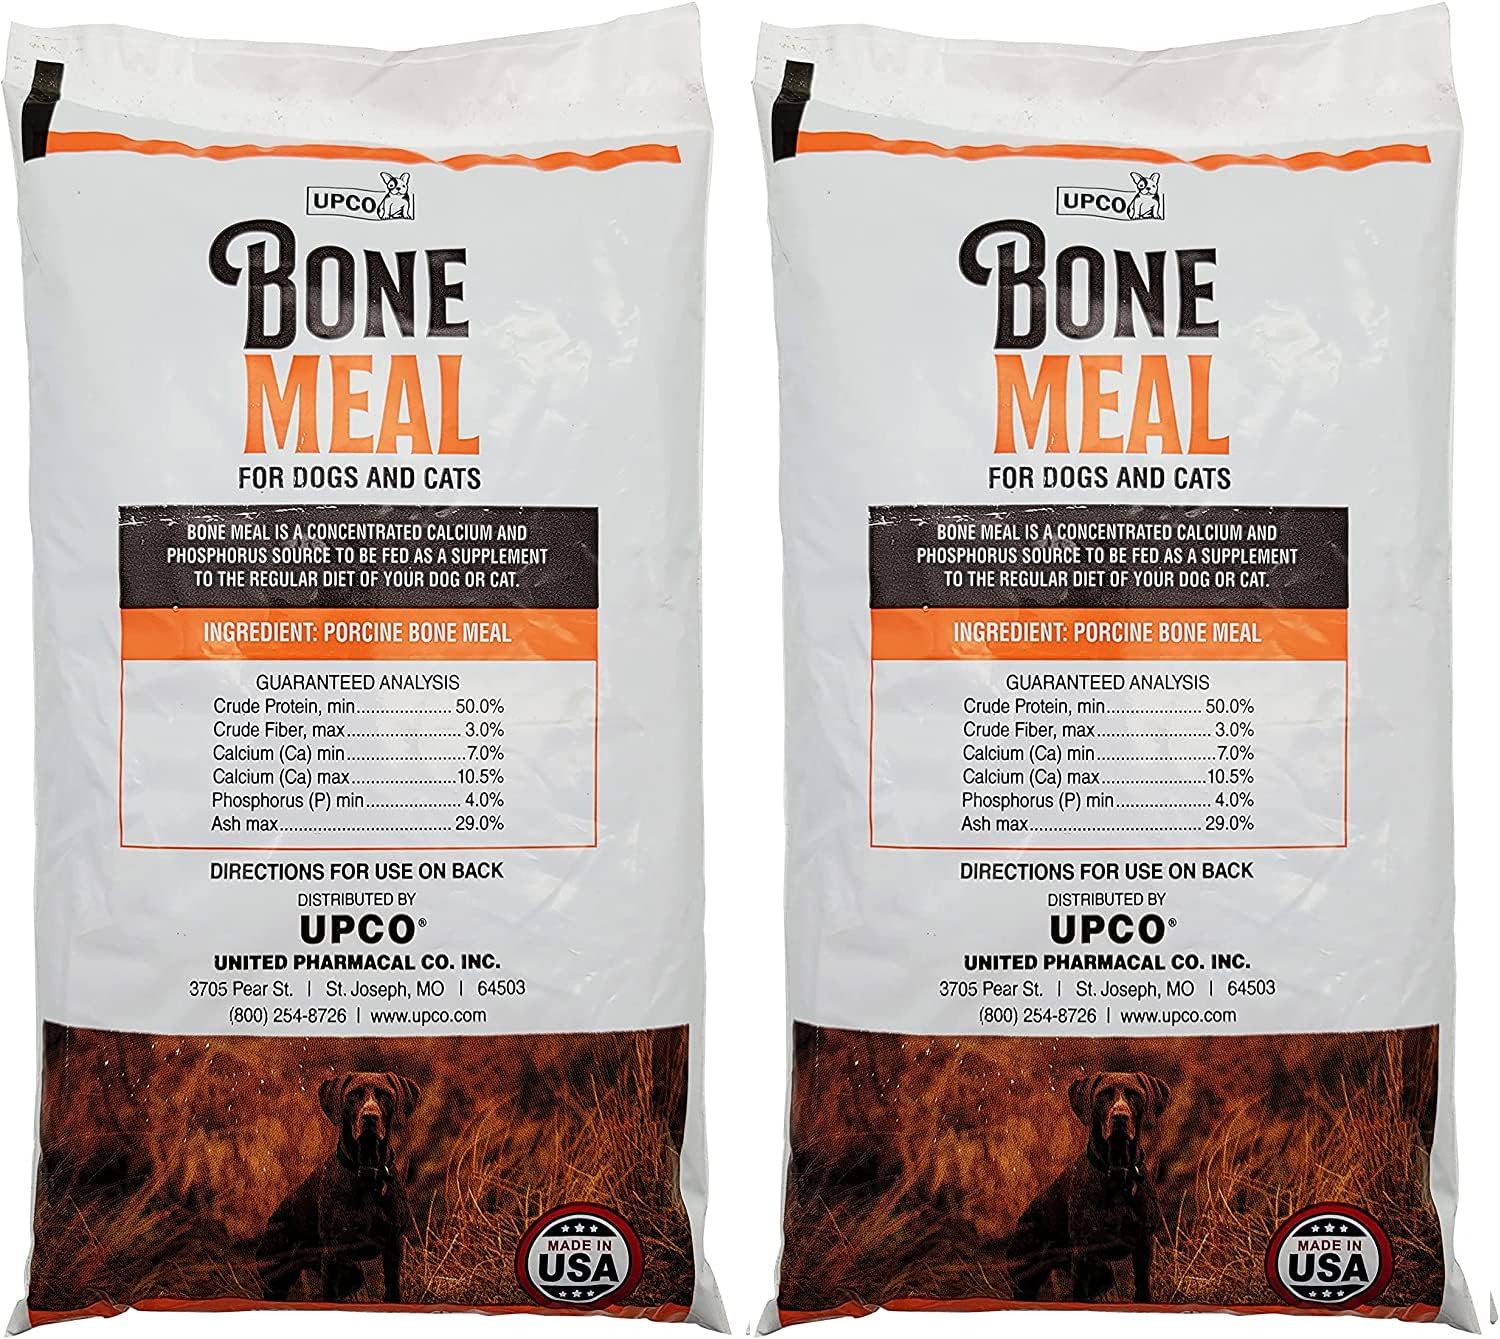 Bone Meal Steamed Powder for Dogs and Cats 2 Pack Total 2 Pounds from Upco Bone Meal Made in USA